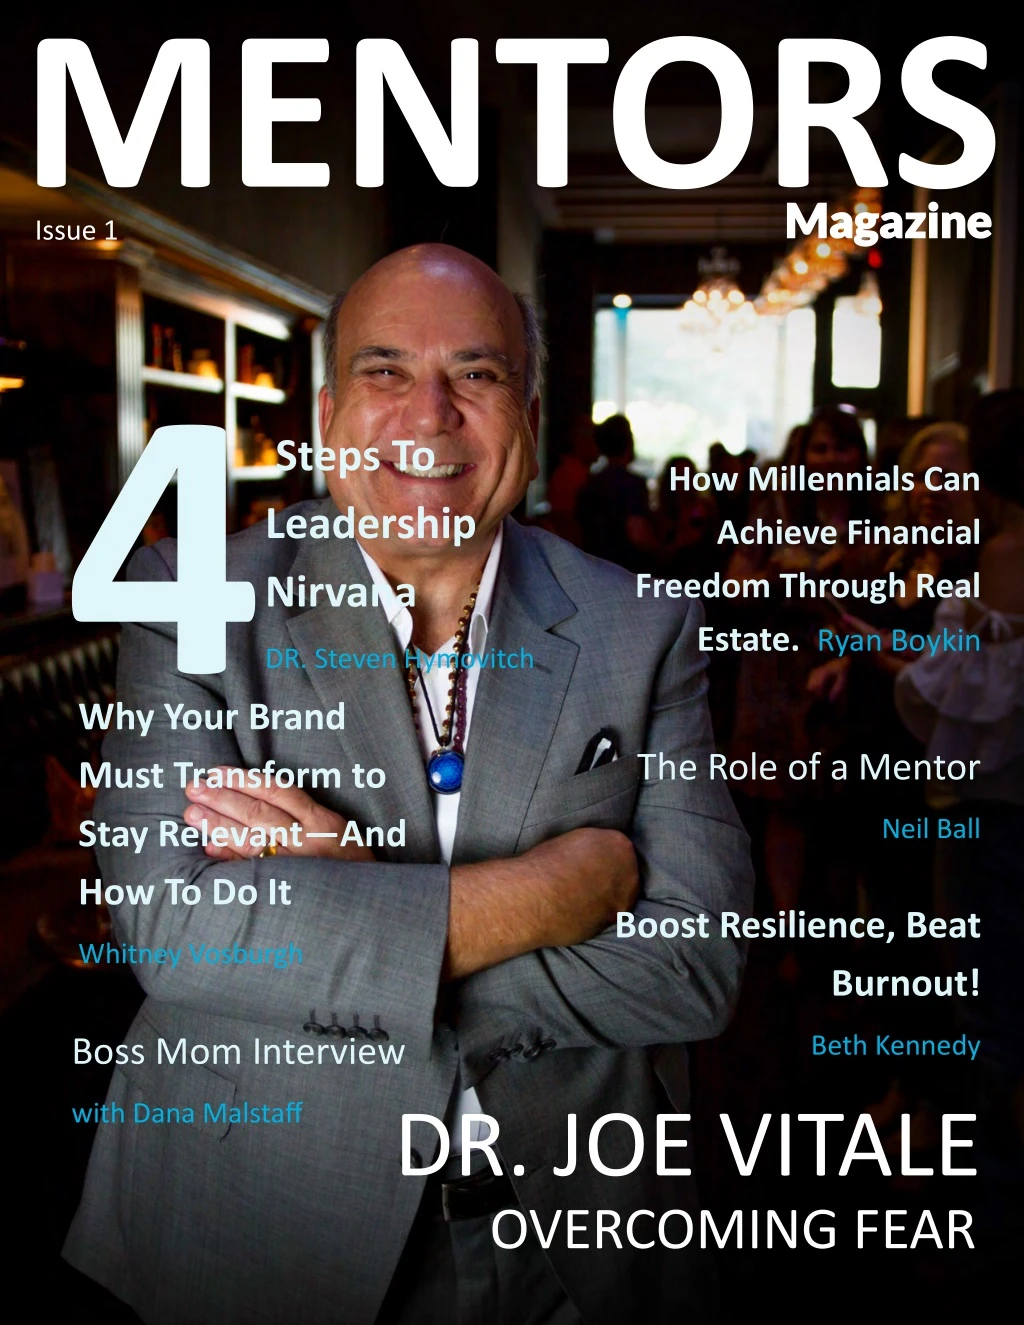 issue 1 mentors